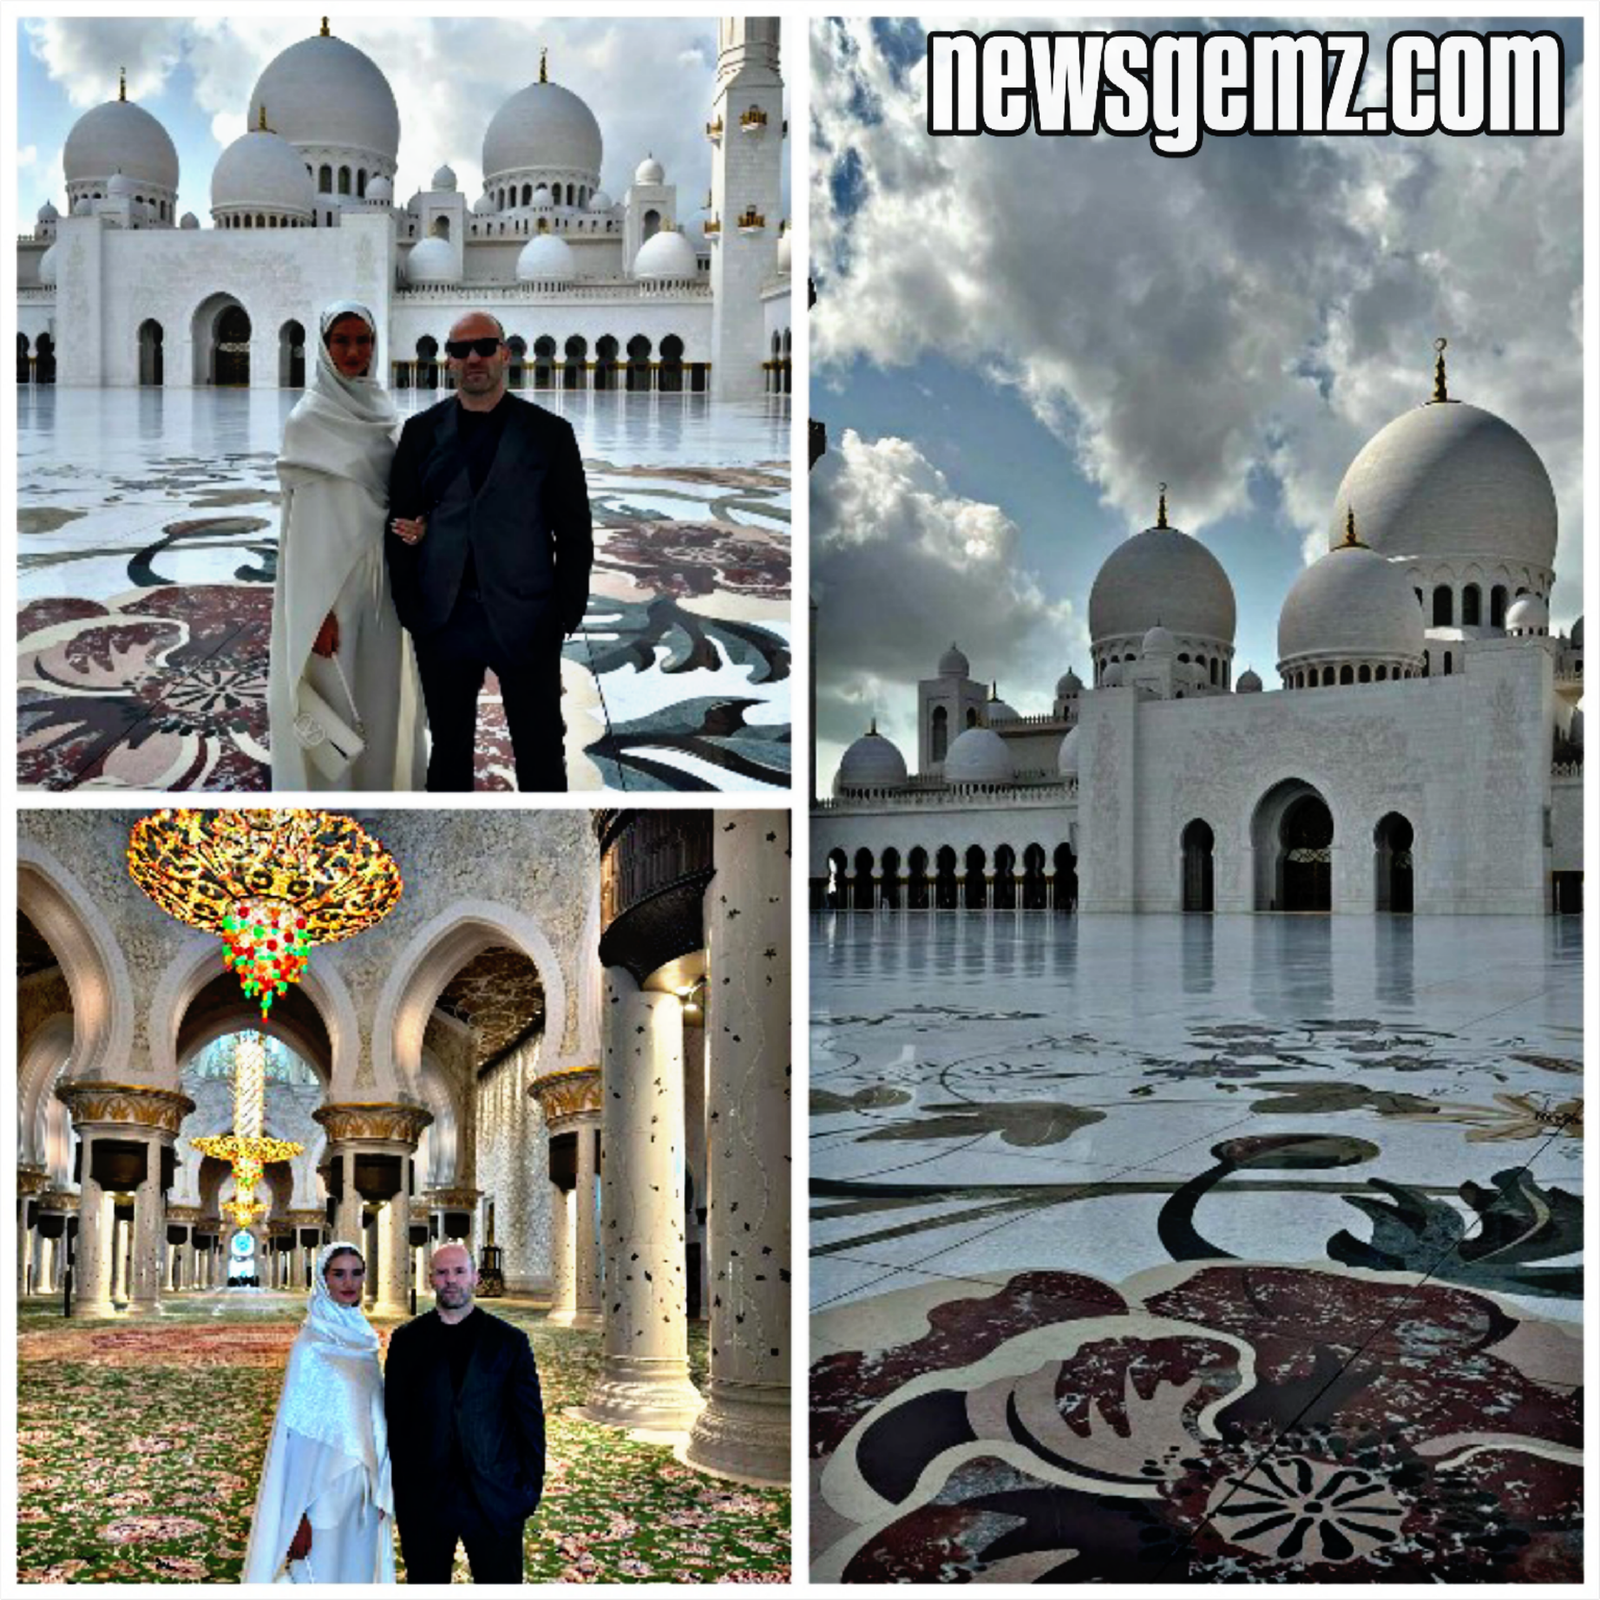 Actor Jason Statham and his wife Visited Sheikh Zayed Grand Mosque in Abu Dhabi